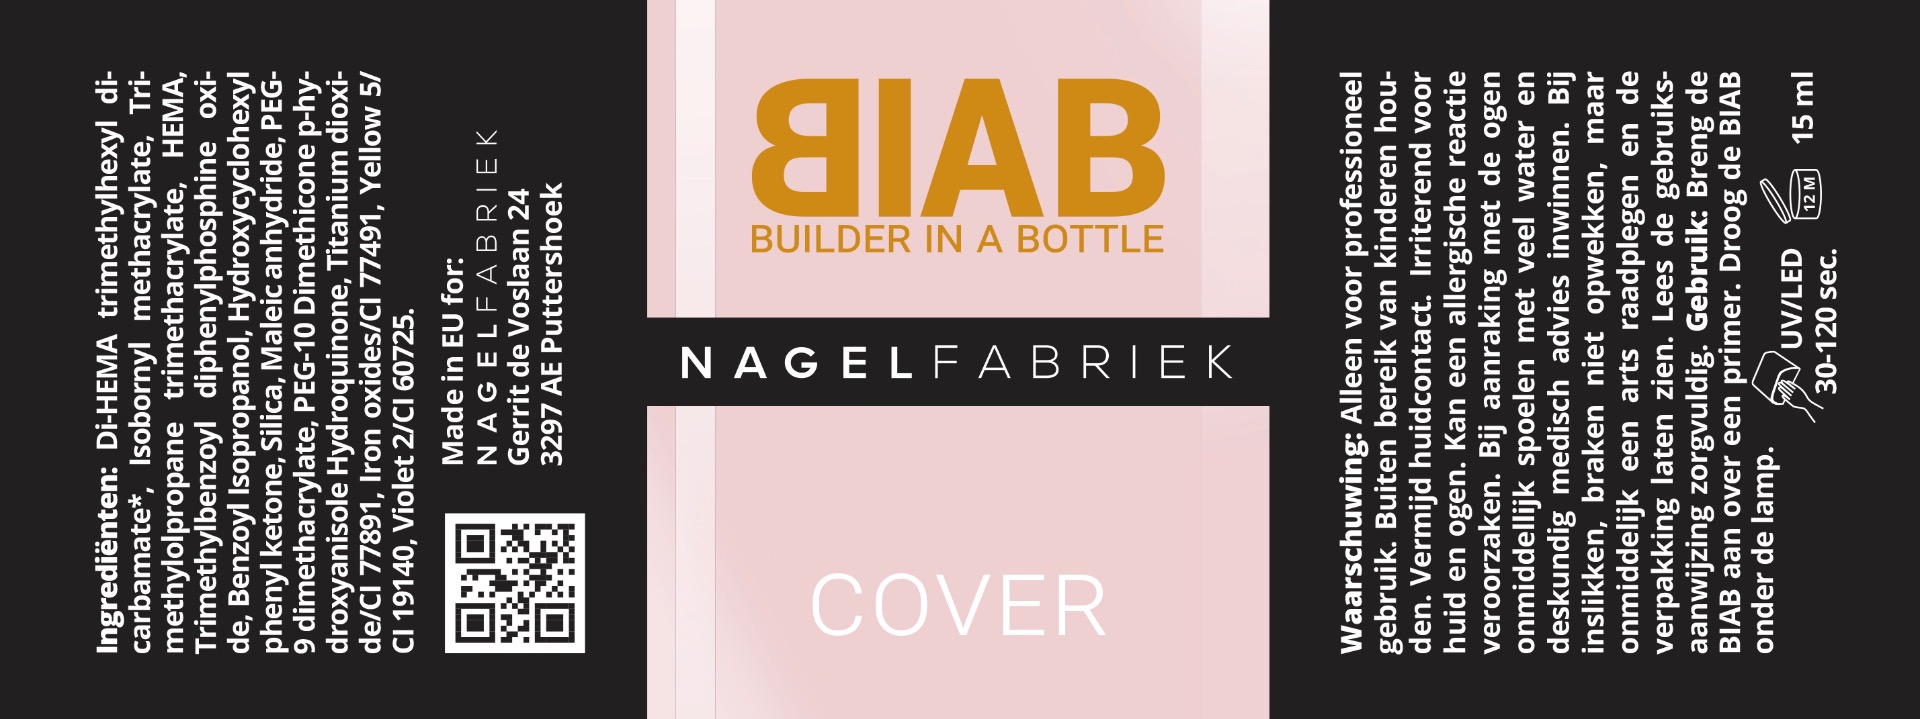 Label Builder In a Bottle Cover - BIAB